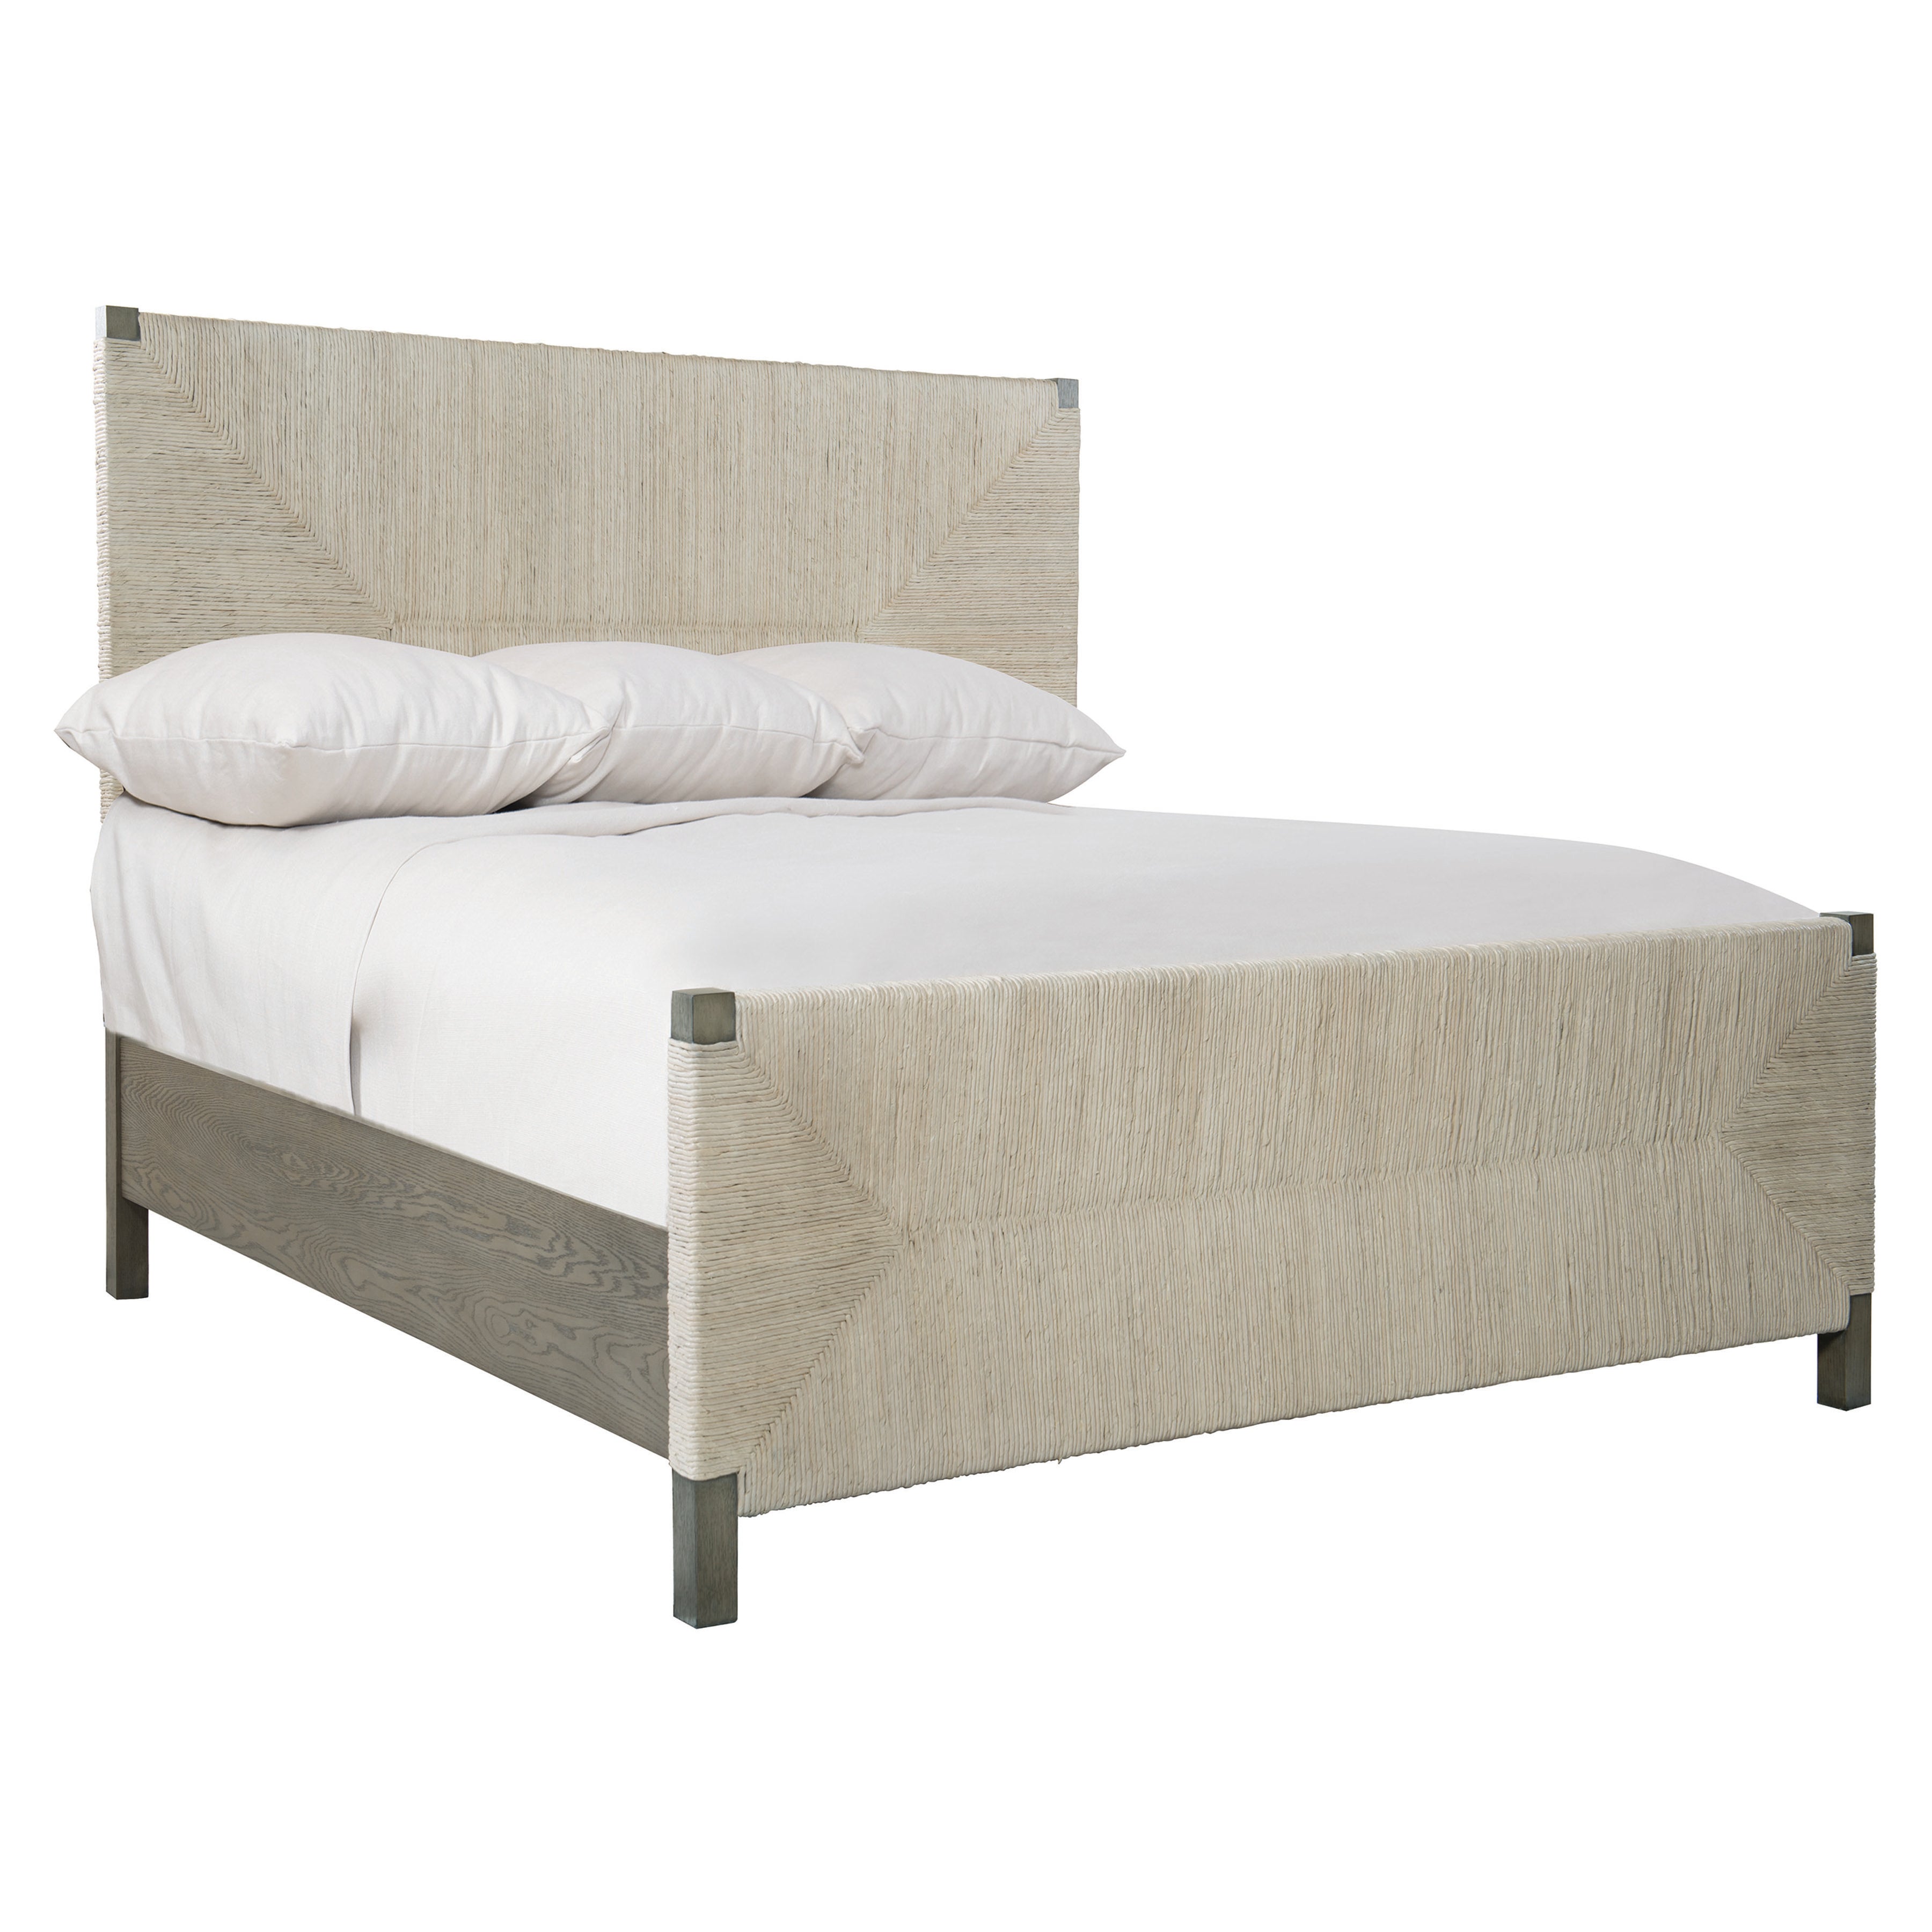 Alannis King Woven Panel Bed